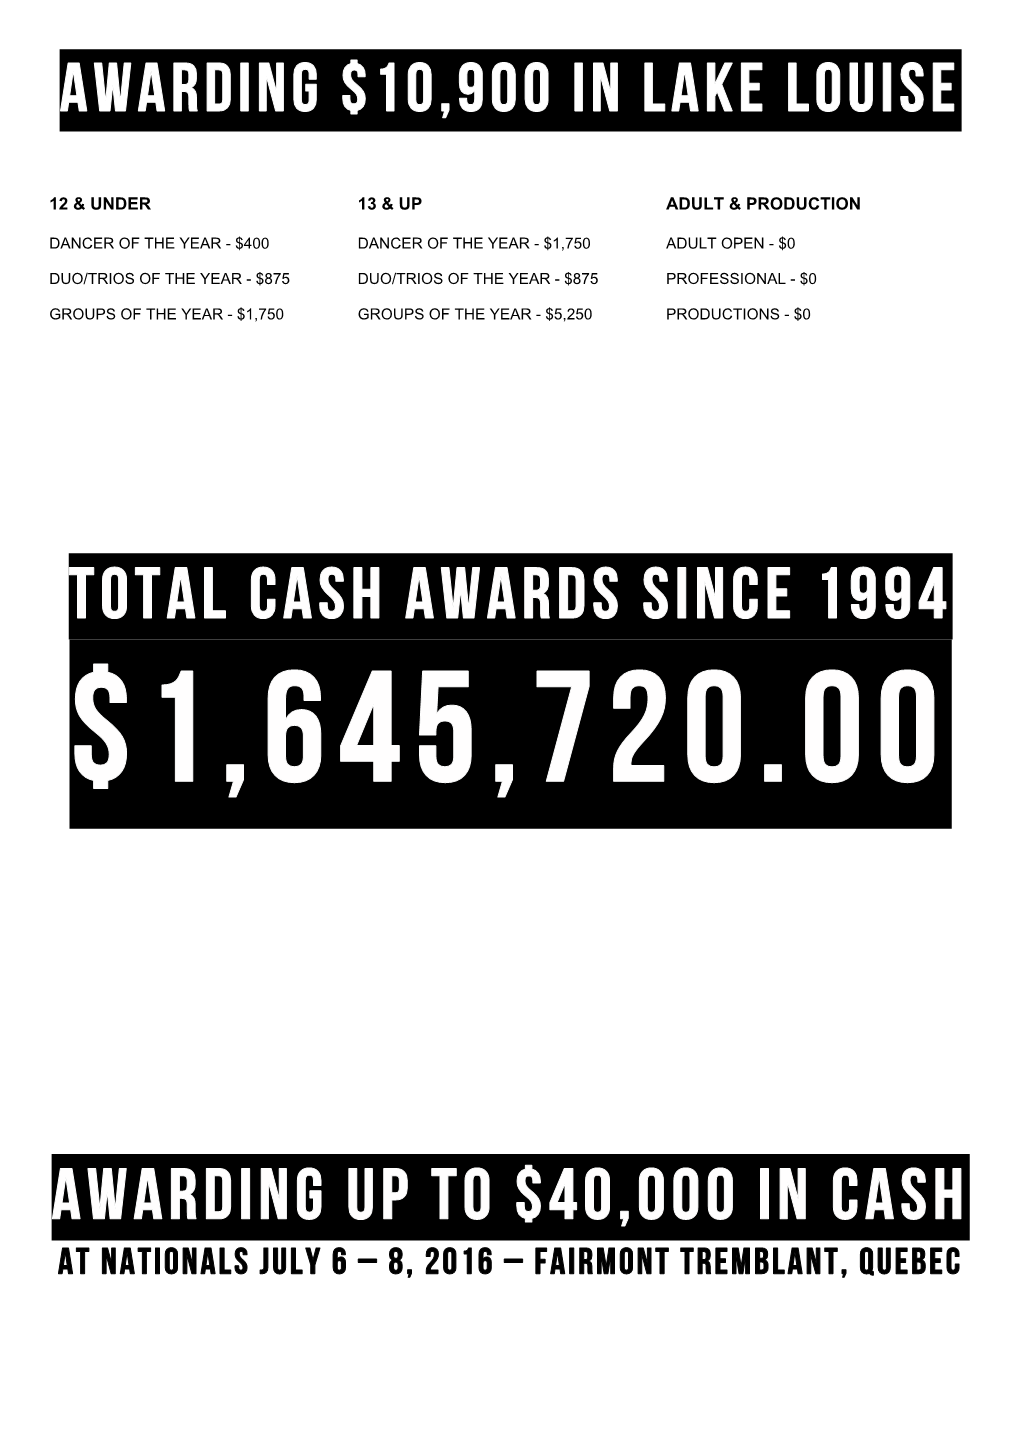 TOTAL CASH AWARDS SINCE 1994 AWARDING up to $40,000 in Cash